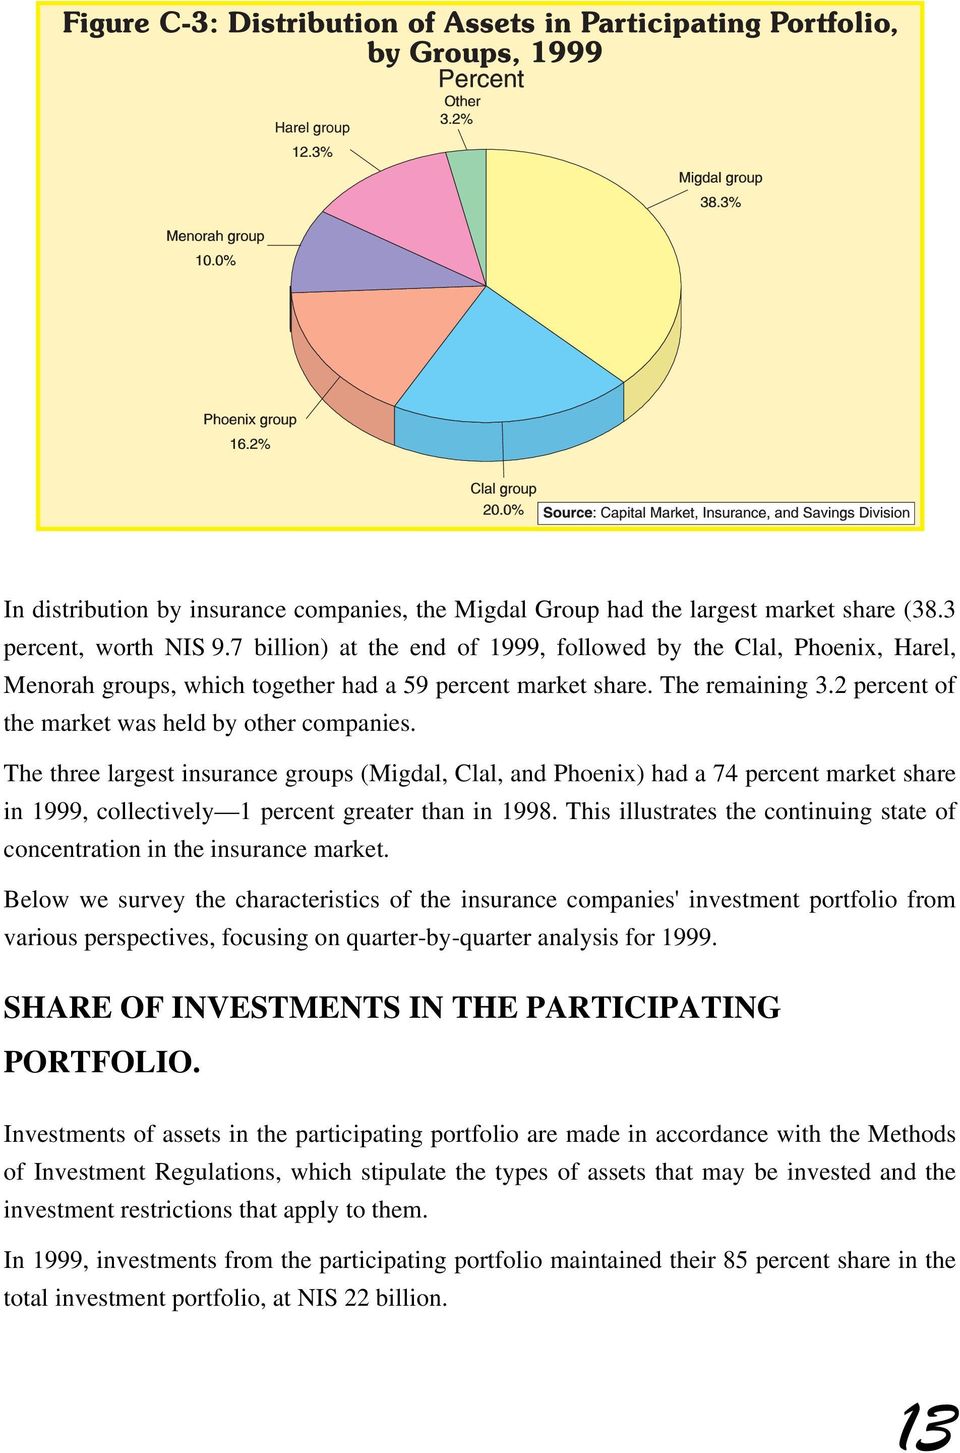 The three largest insurance groups (Migdal, Clal, and Phoenix) had a 74 percent market share in 1999, collectively 1 percent greater than in 1998.